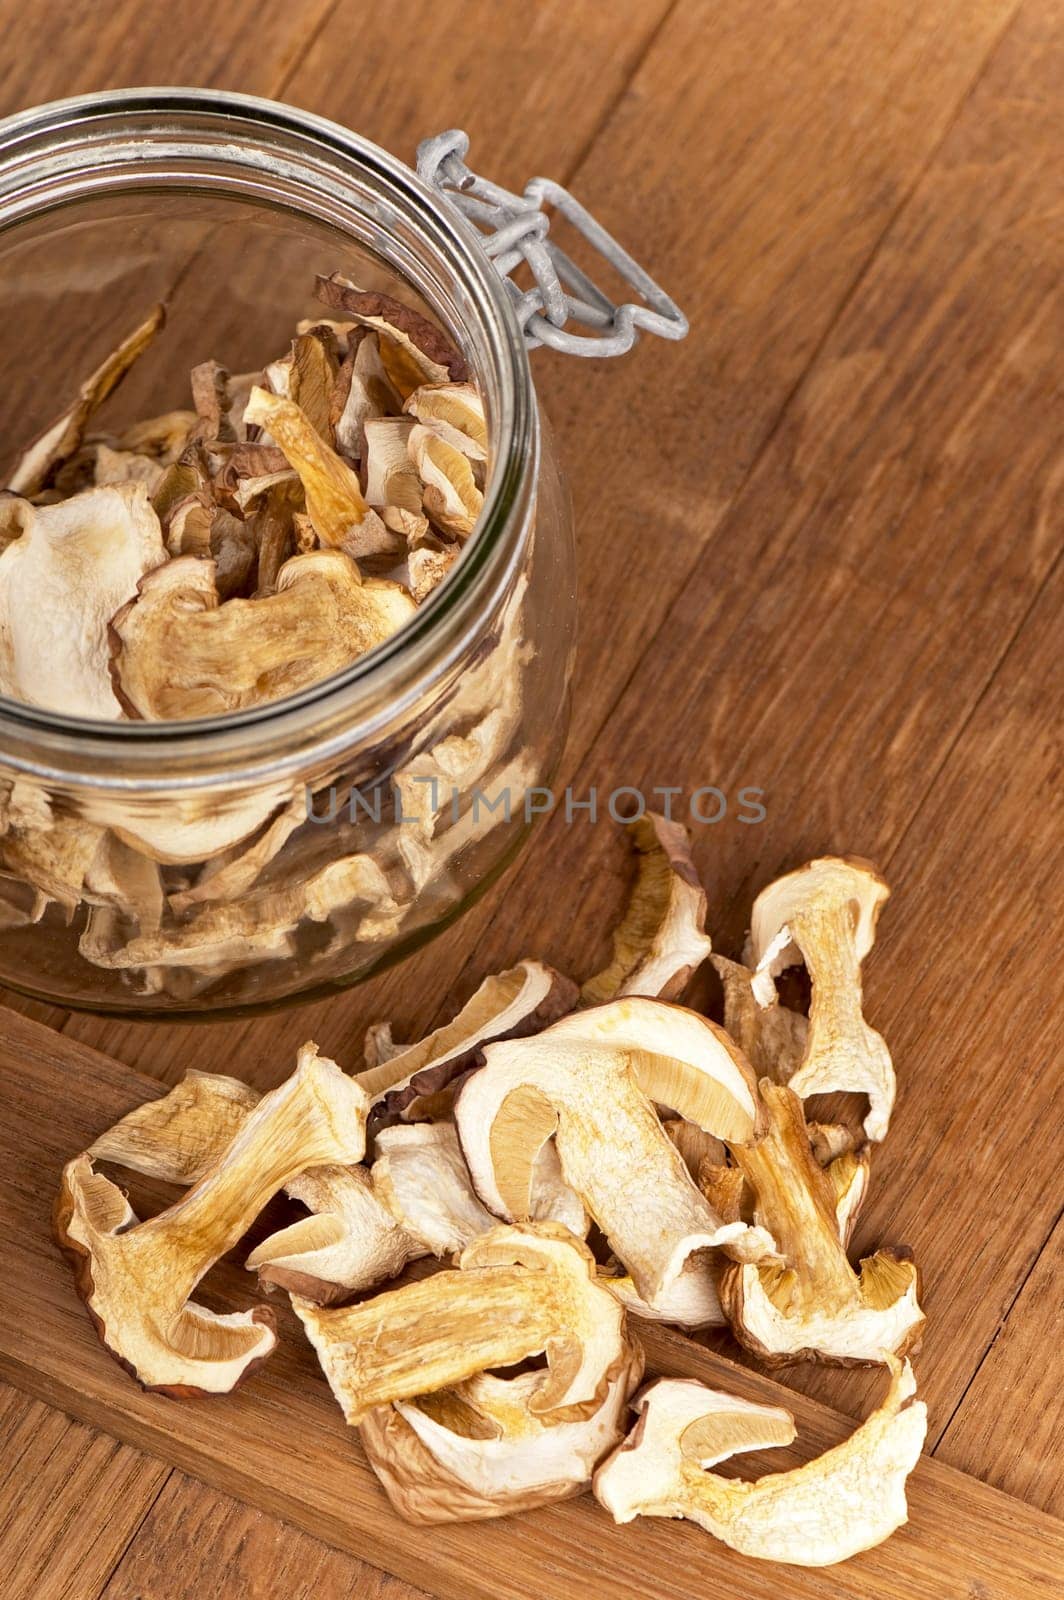 Porcini mushrooms cut into slices and dried are used to prepare vegetarian dishes. Dried Porcini Mushrooms On A Wooden Kitchen Table by aprilphoto